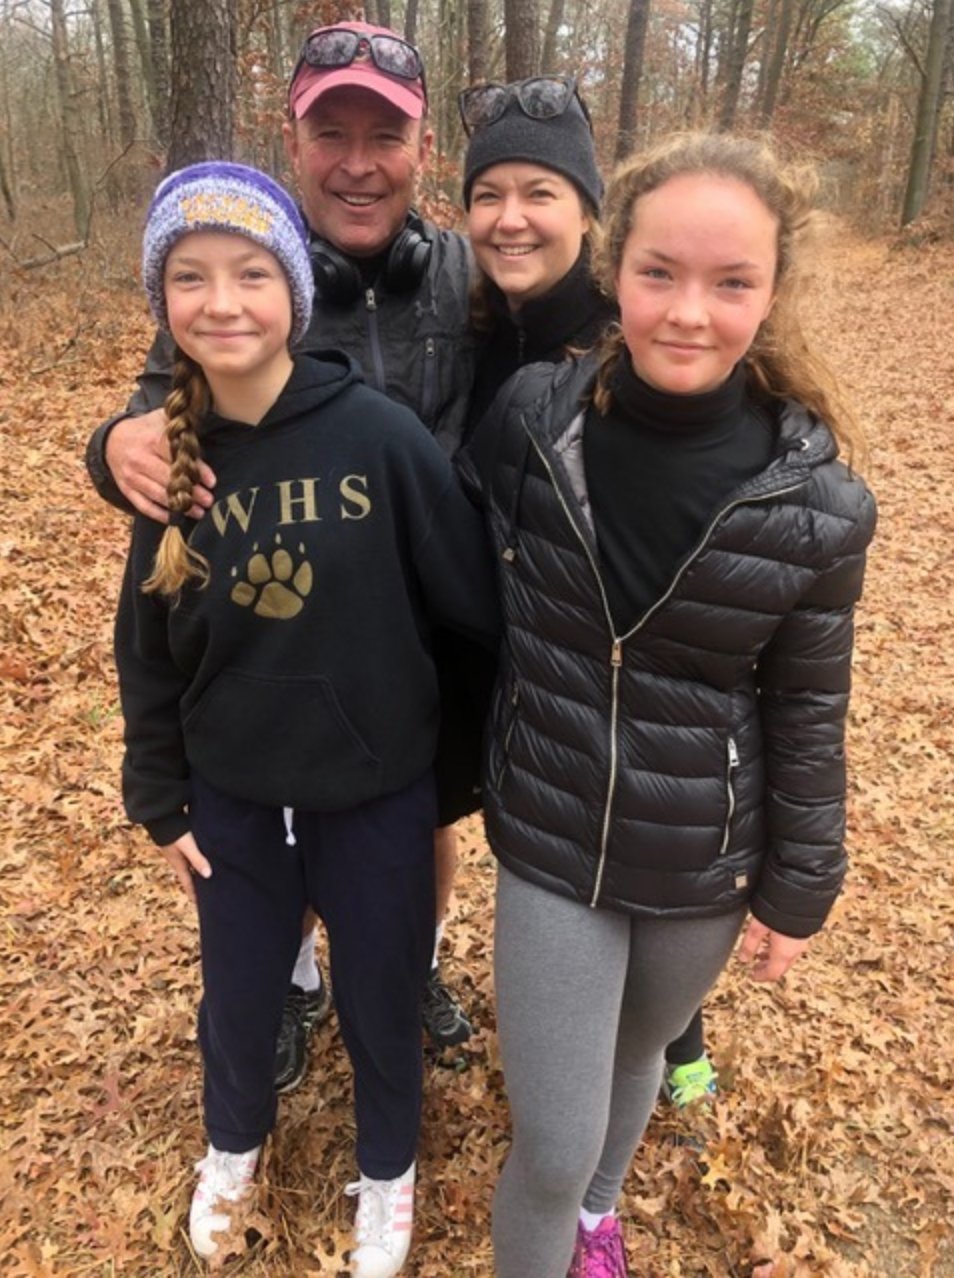 Counting his family—wife Christina and two daughters in Sayville Public School—as a source of strength and inspiration, Bertsch said he thinks of them first when looking to serve the community as a whole.